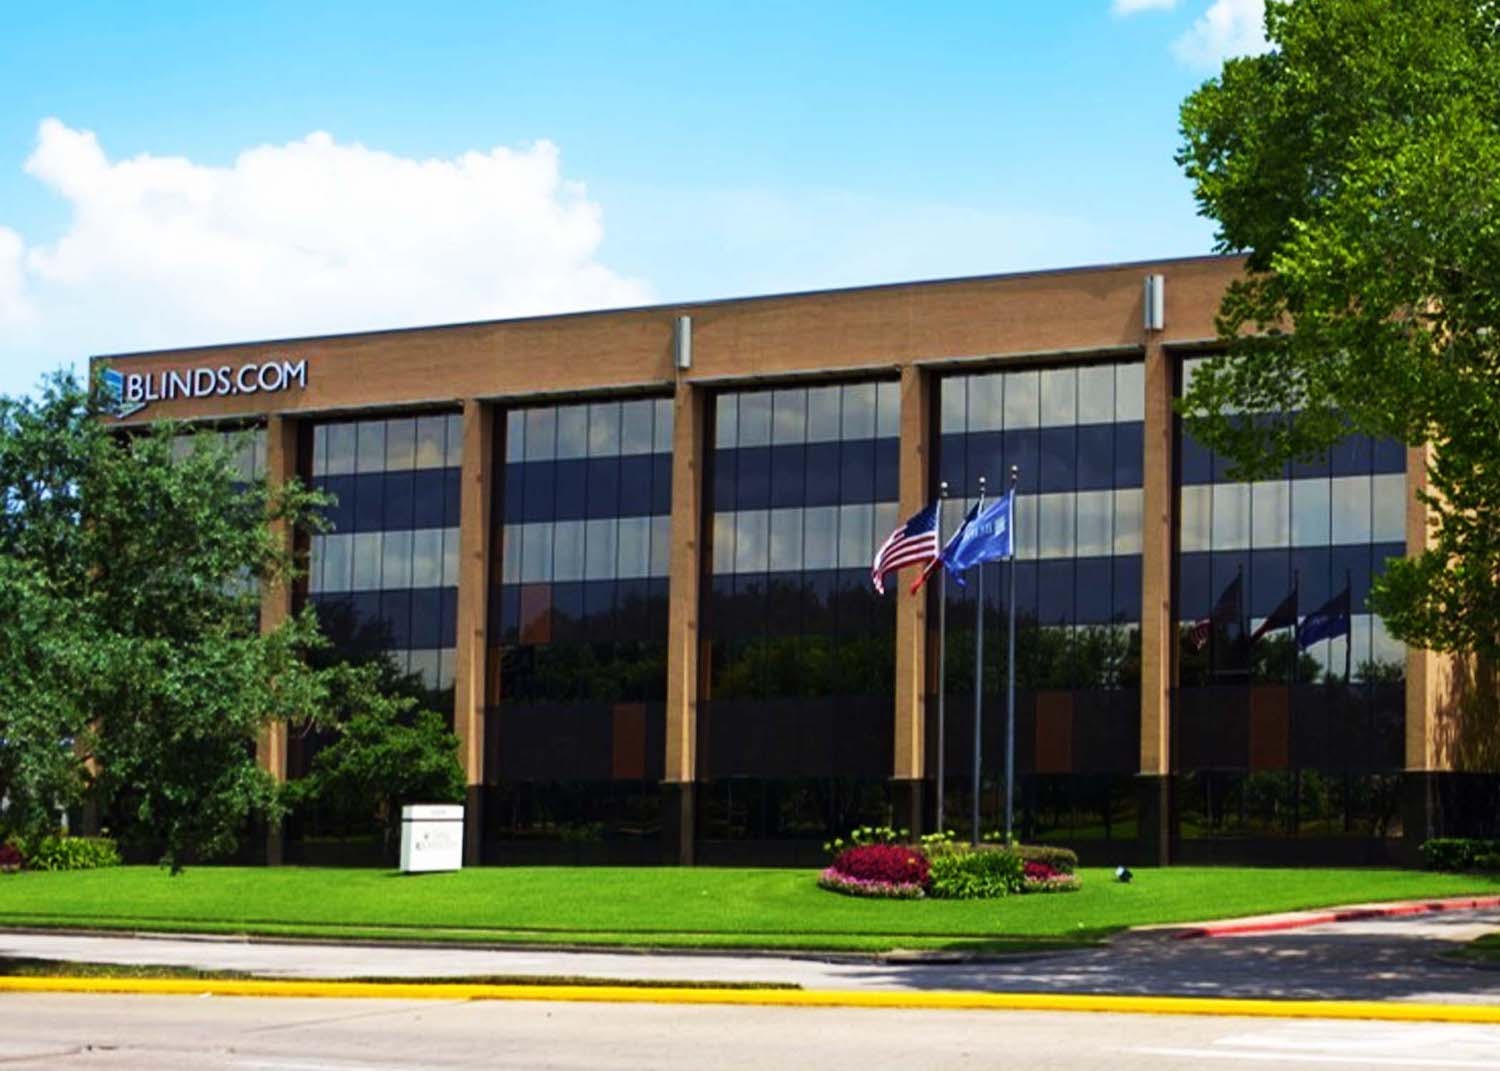 Cove Capital Buys Blinds.com Corporate Headquarters for Delaware Statutory Trust Offering